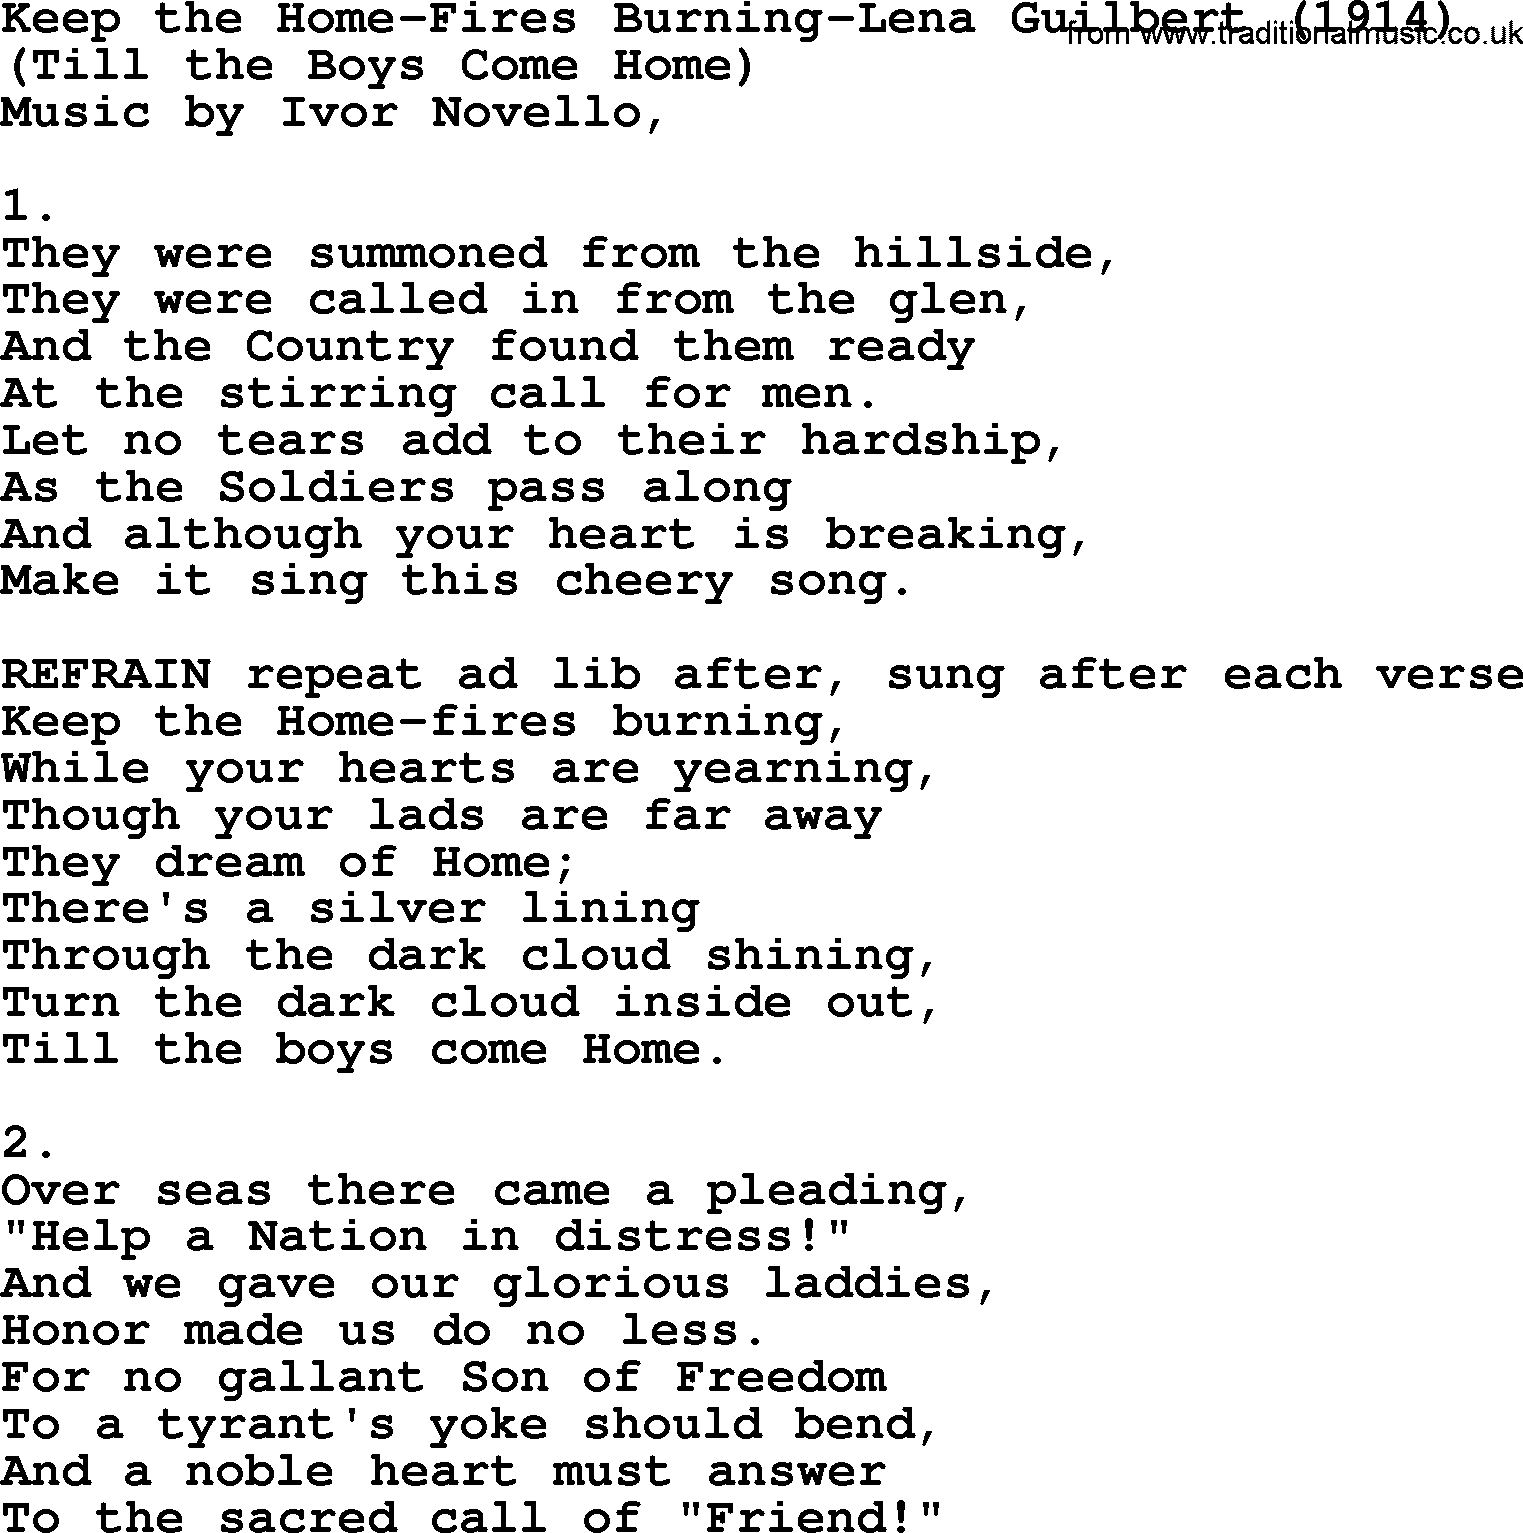 World War(WW1) One Song: Keep The Home-Fires Burning-Lena Guilbert 1914, lyrics and PDF